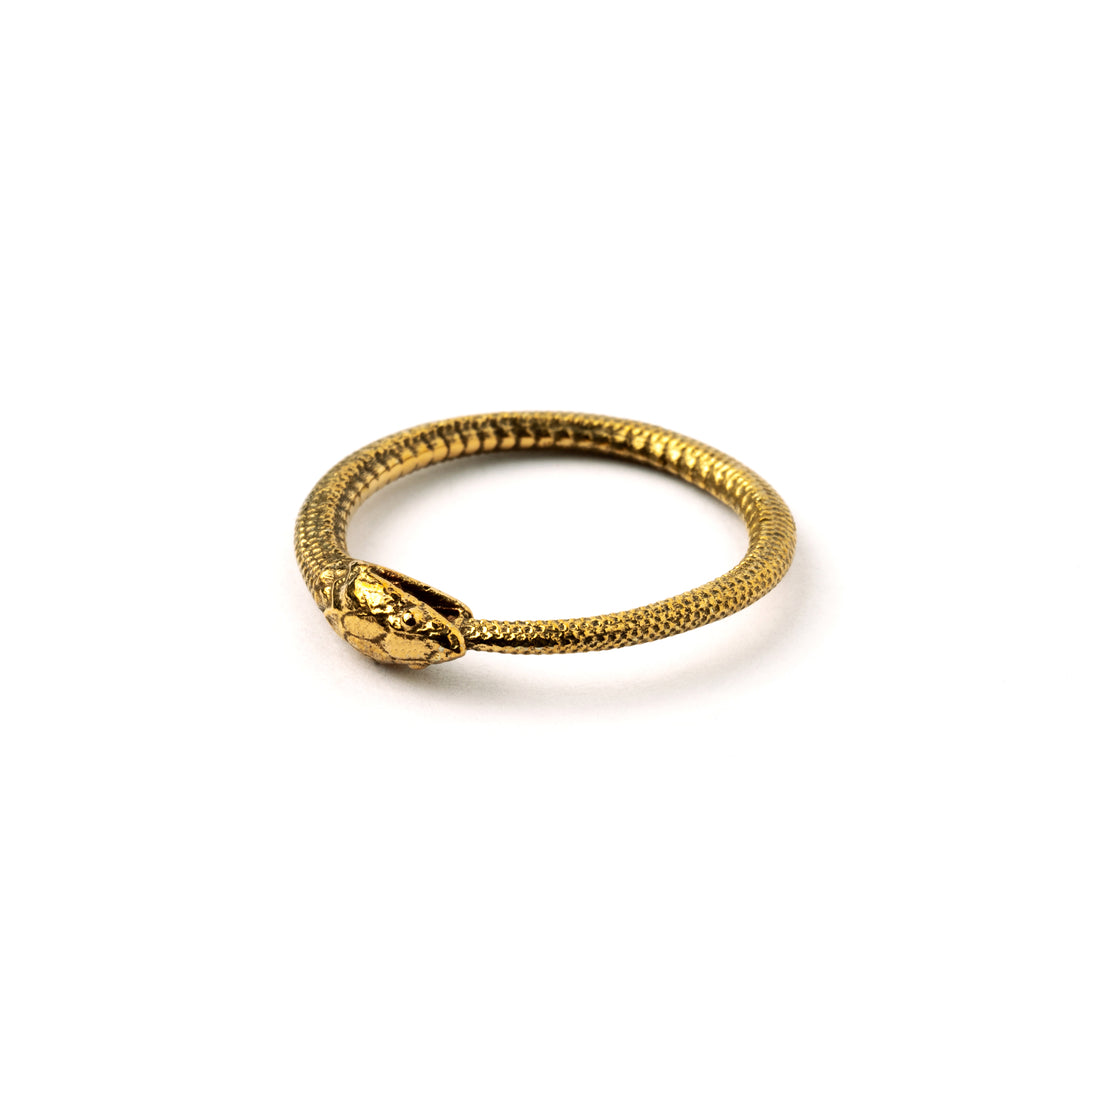 Bronze Ouroboros snake band ring left side view